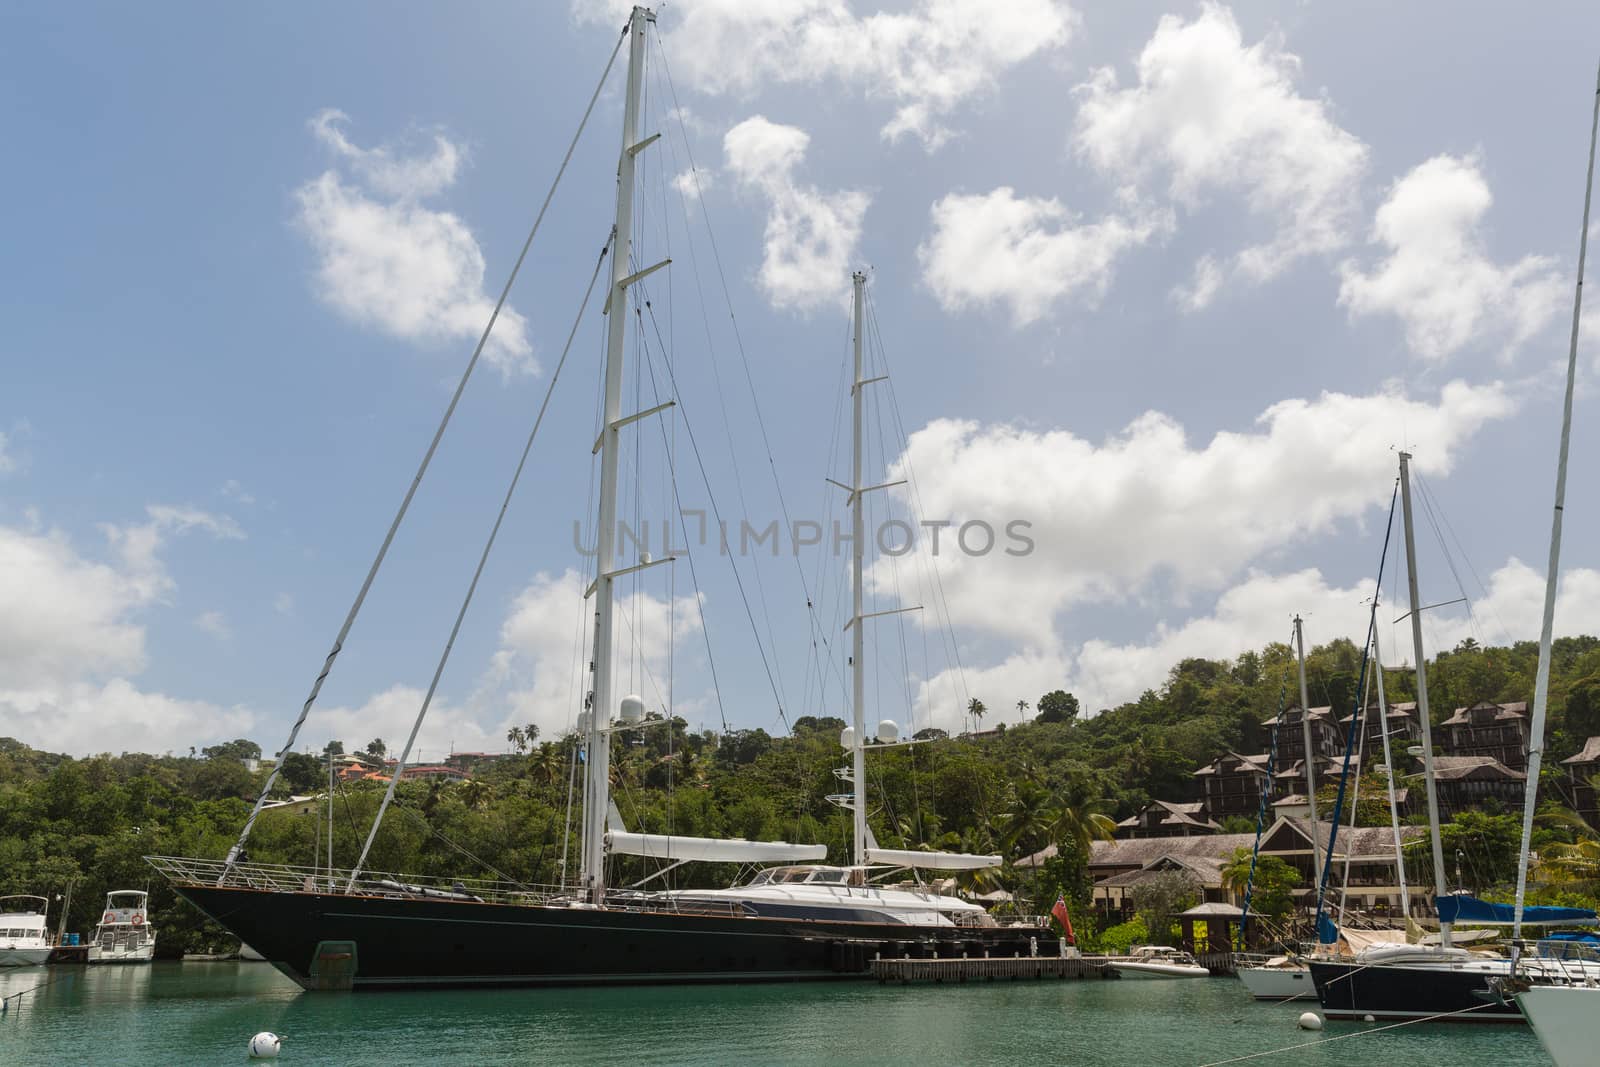 Harbour in St Lucia by chrisukphoto